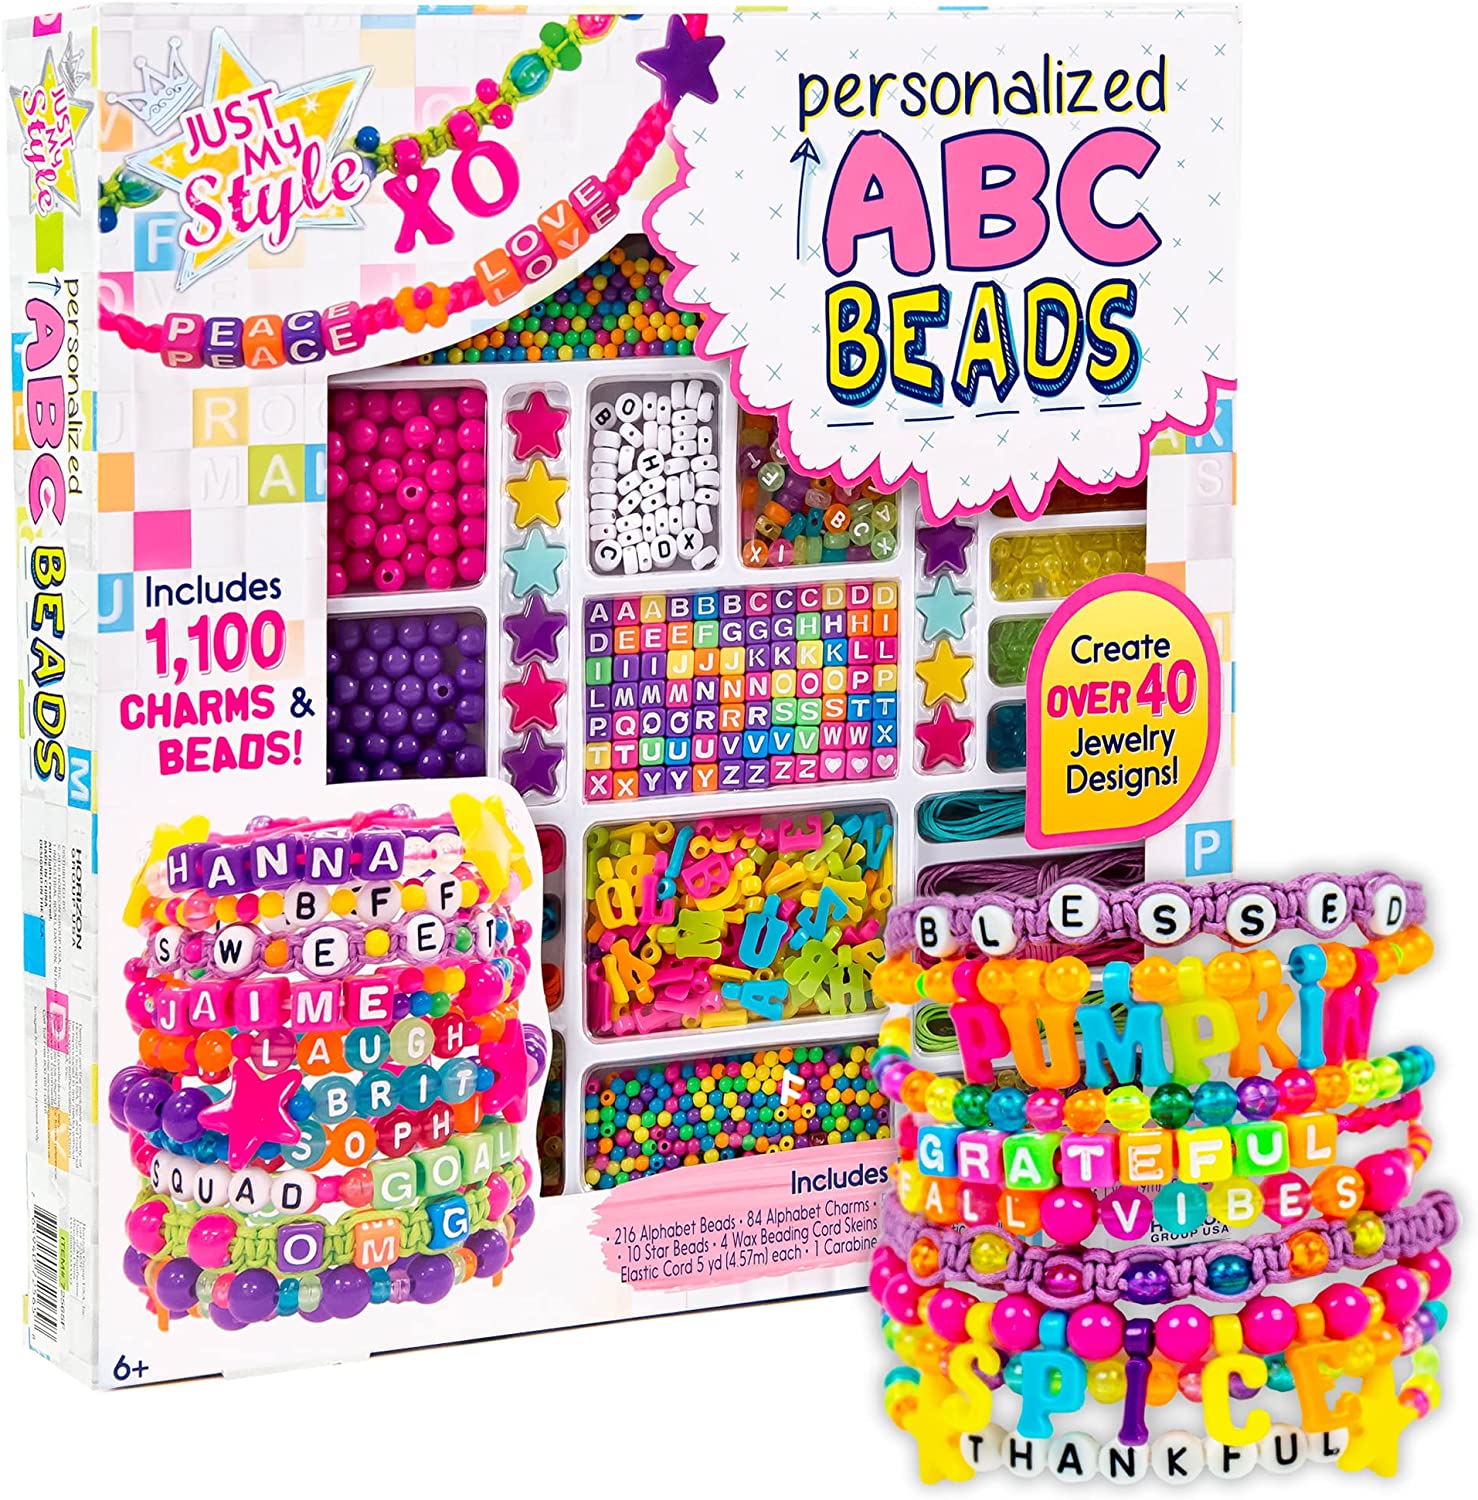 Just My Style ABC Beads- 1000+ Charms & Beads